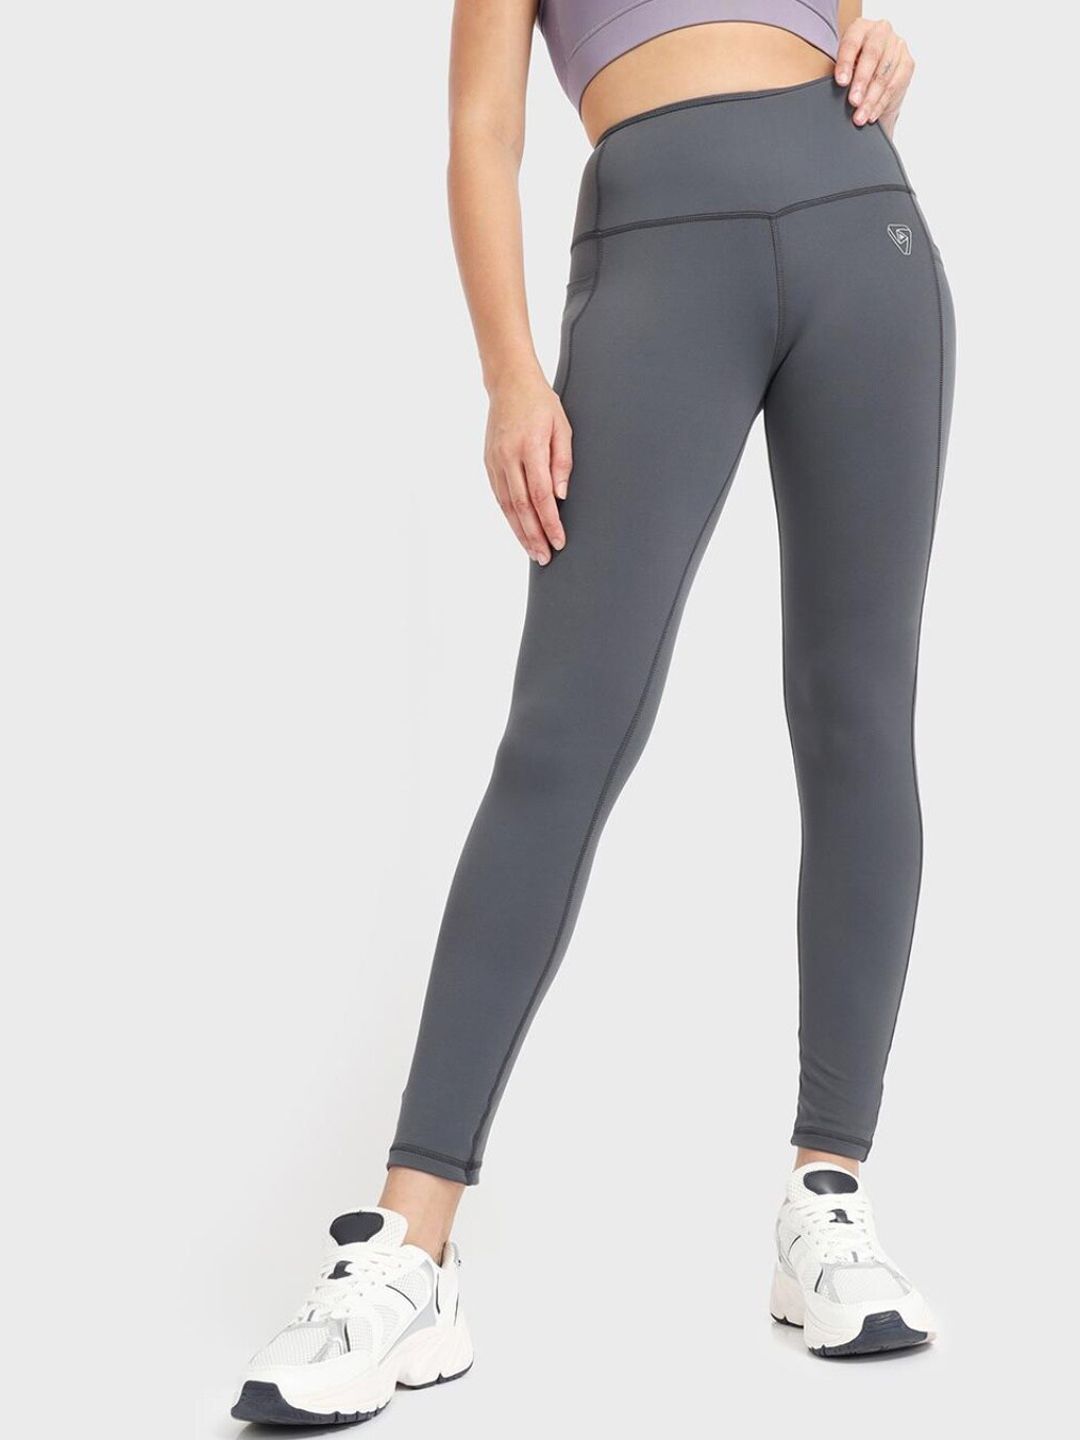 PLAY BY BEWAKOOF Women Charcoal Grey Solid Training Tights Price in India